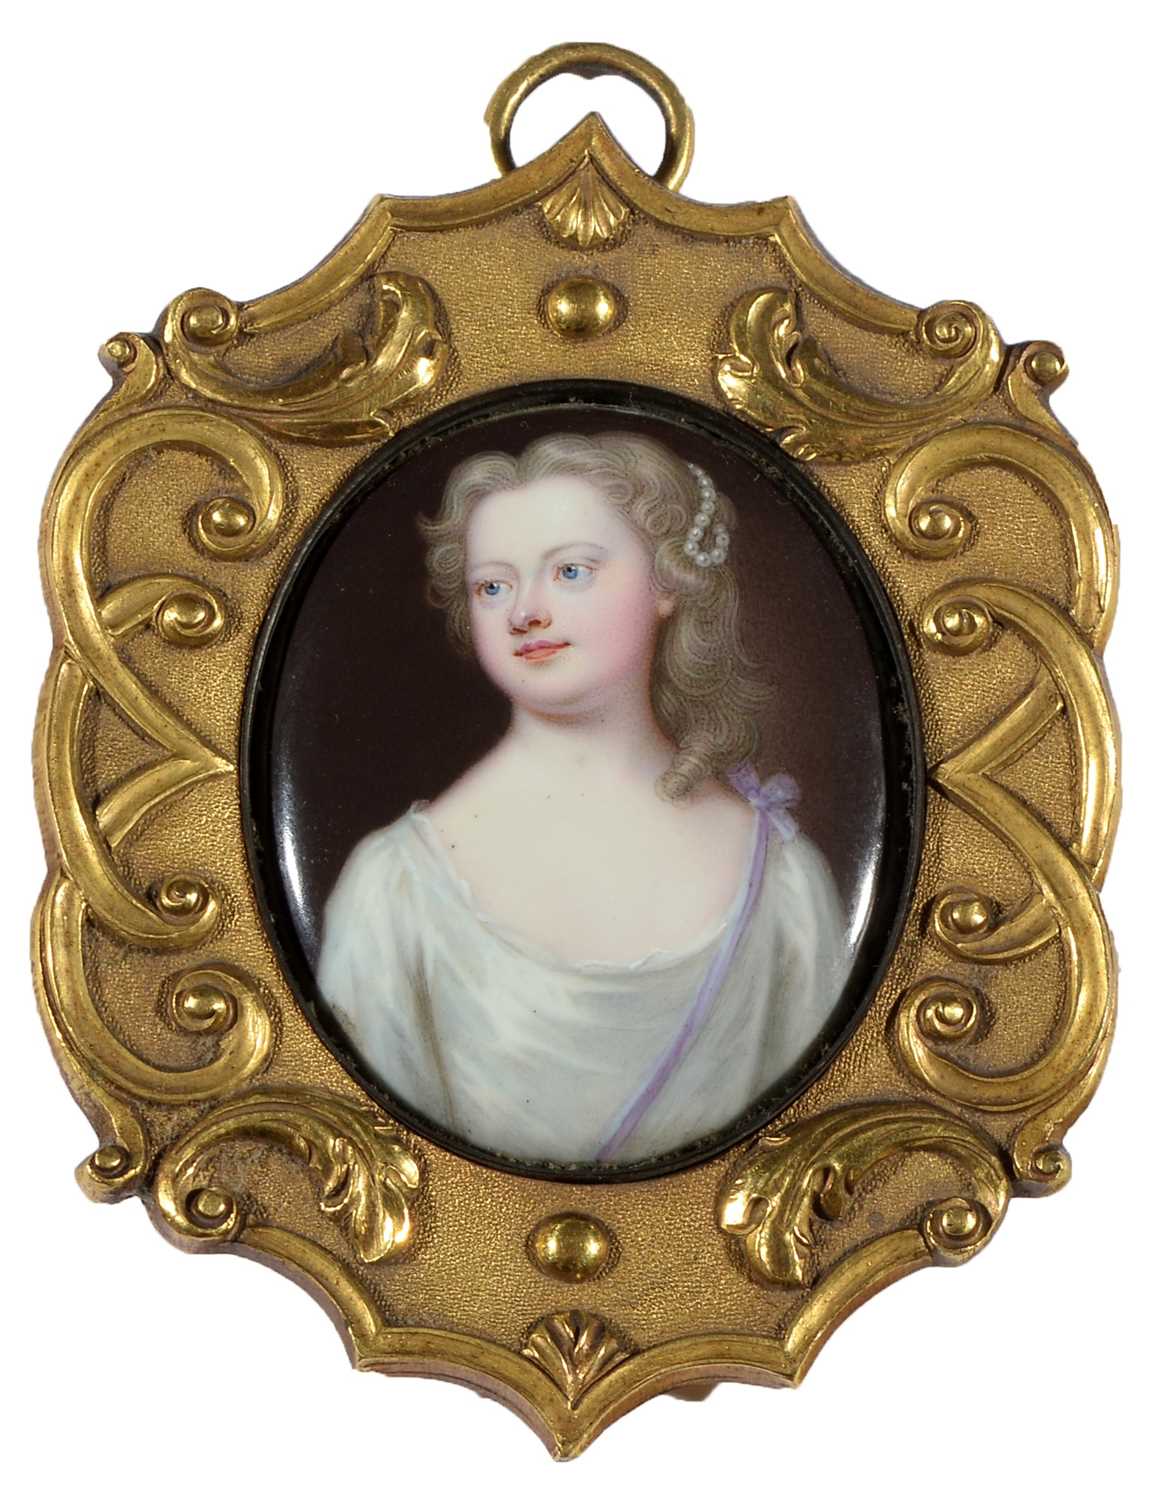 Lot 717 - Late 18th/early 19th Century Continental School - porcelain miniature portrait